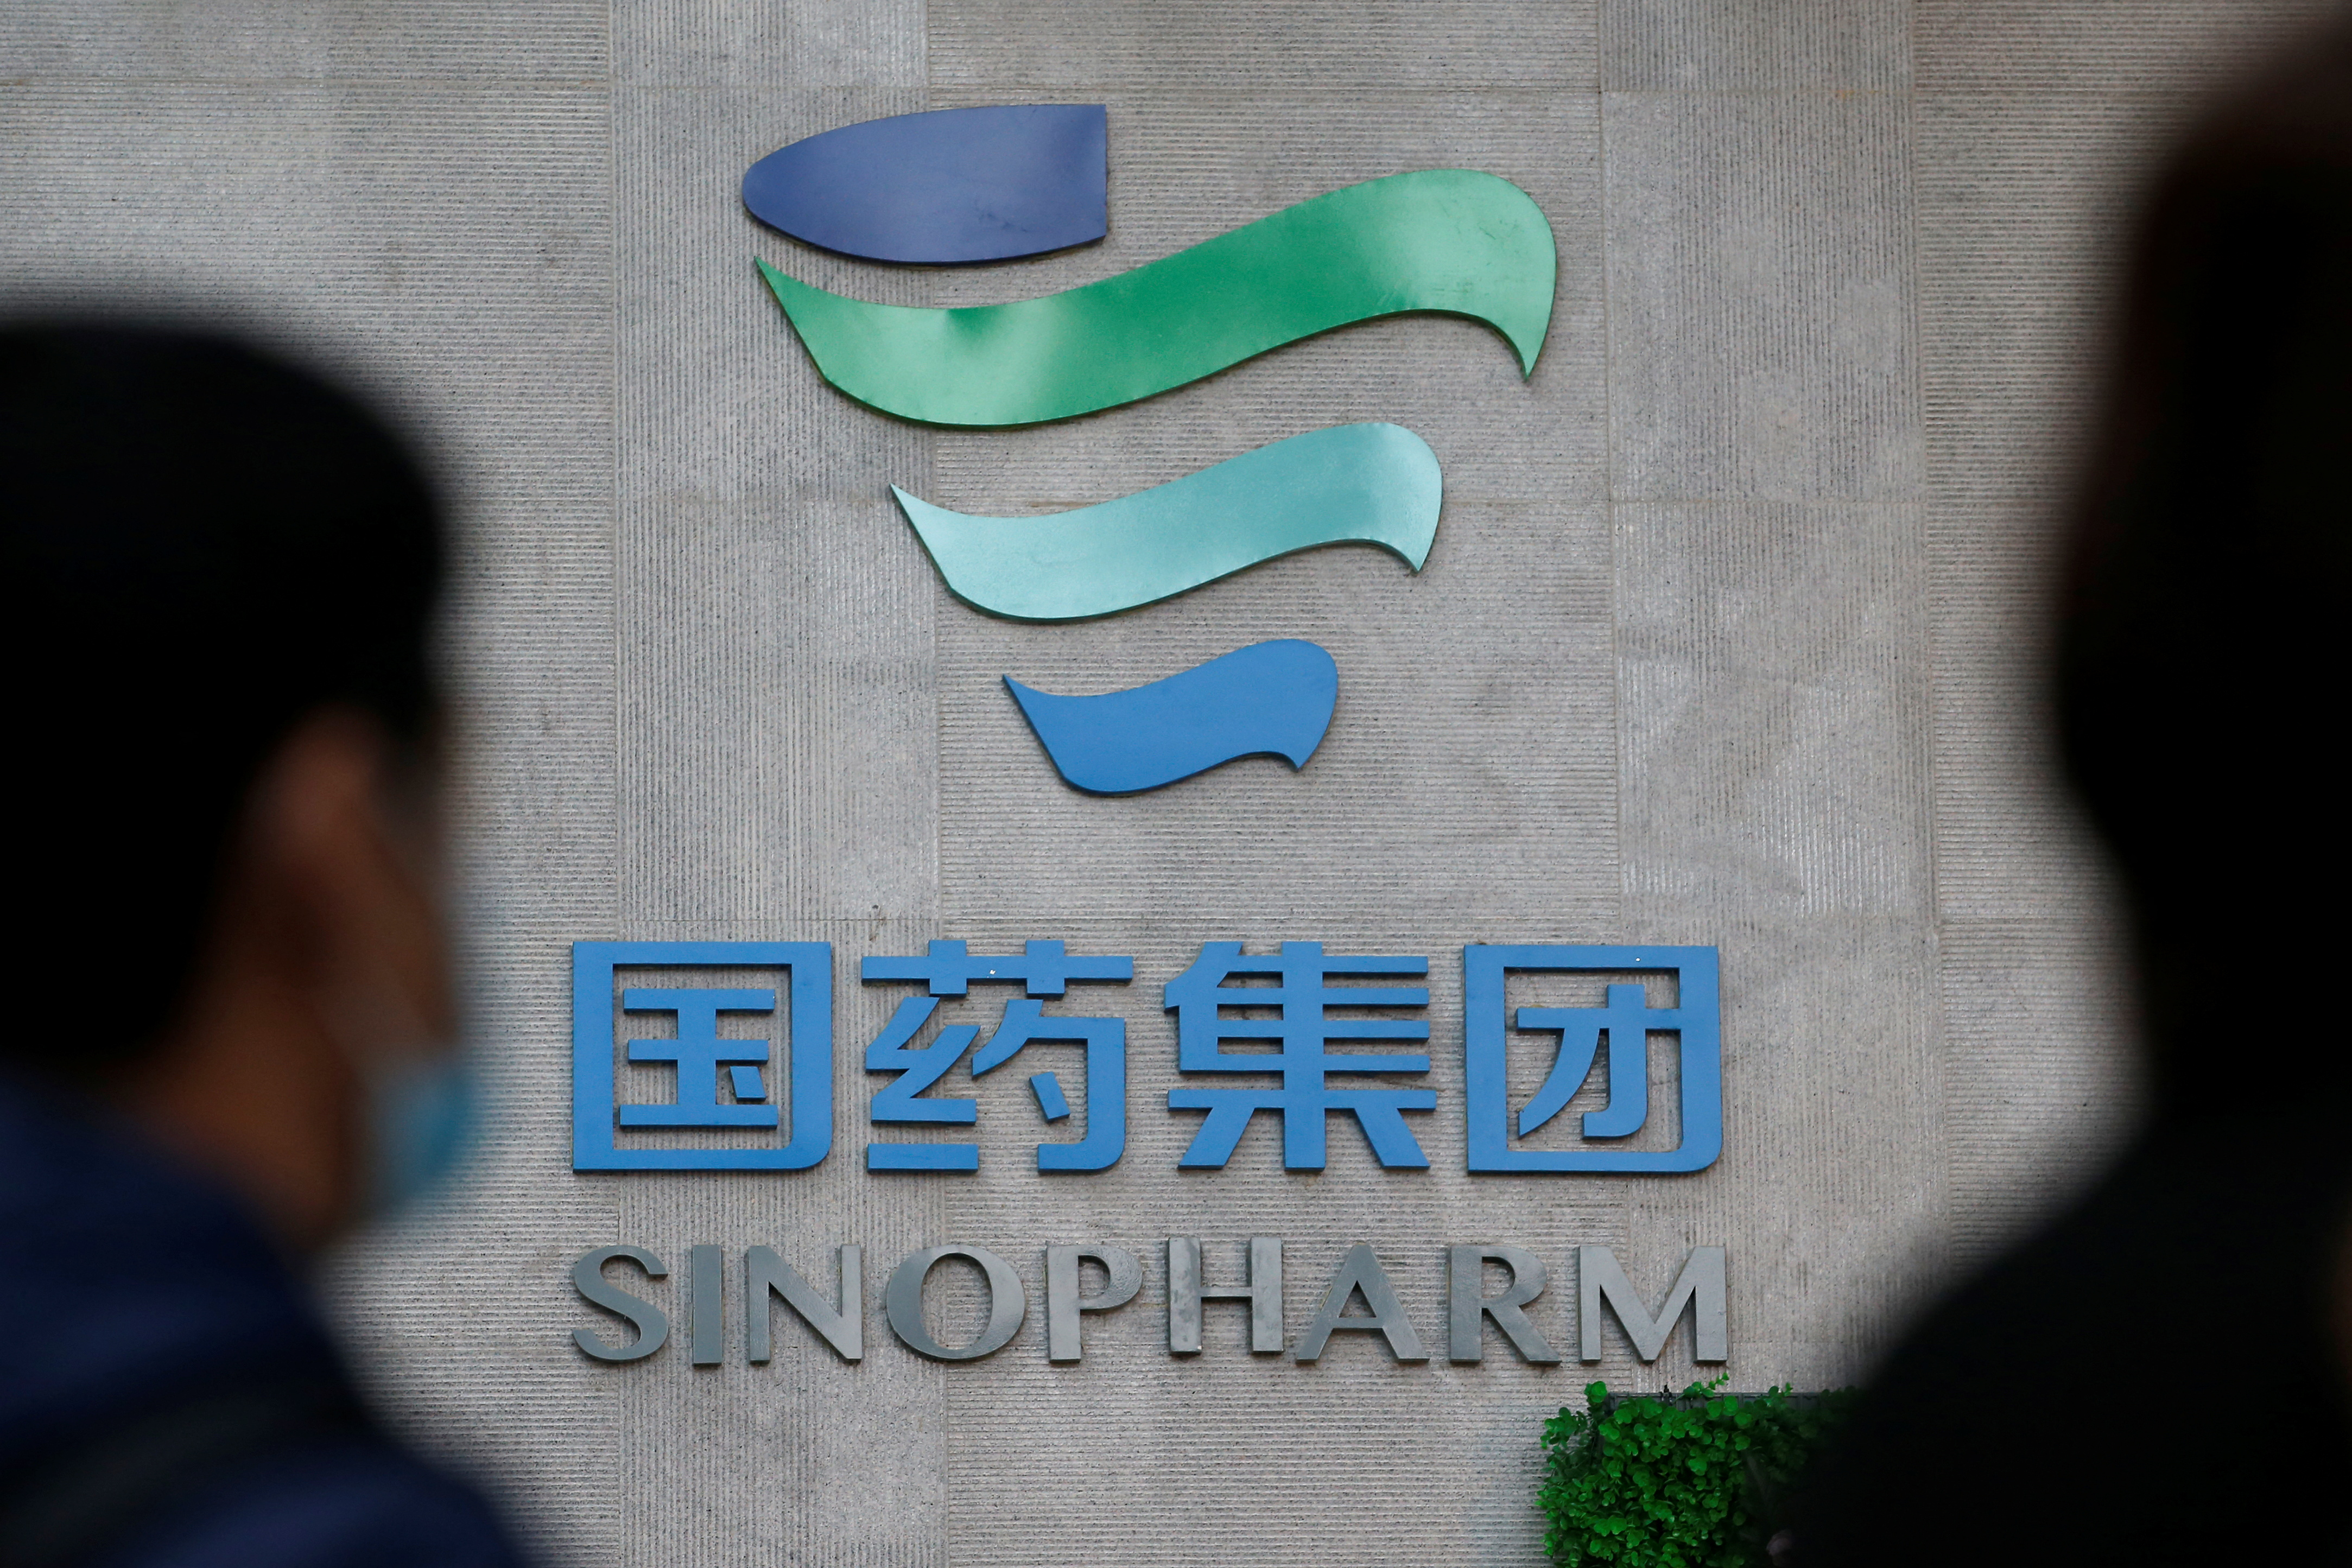 A logo of Sinopharm is pictured during a government-organised visit to the production line of COVID-19 vaccine by Beijing Institute of Biological Products of Sinopharm's China National Biotec Group (CNBG), in Beijing, China February 26, 2021. REUTERS/Tingshu Wang